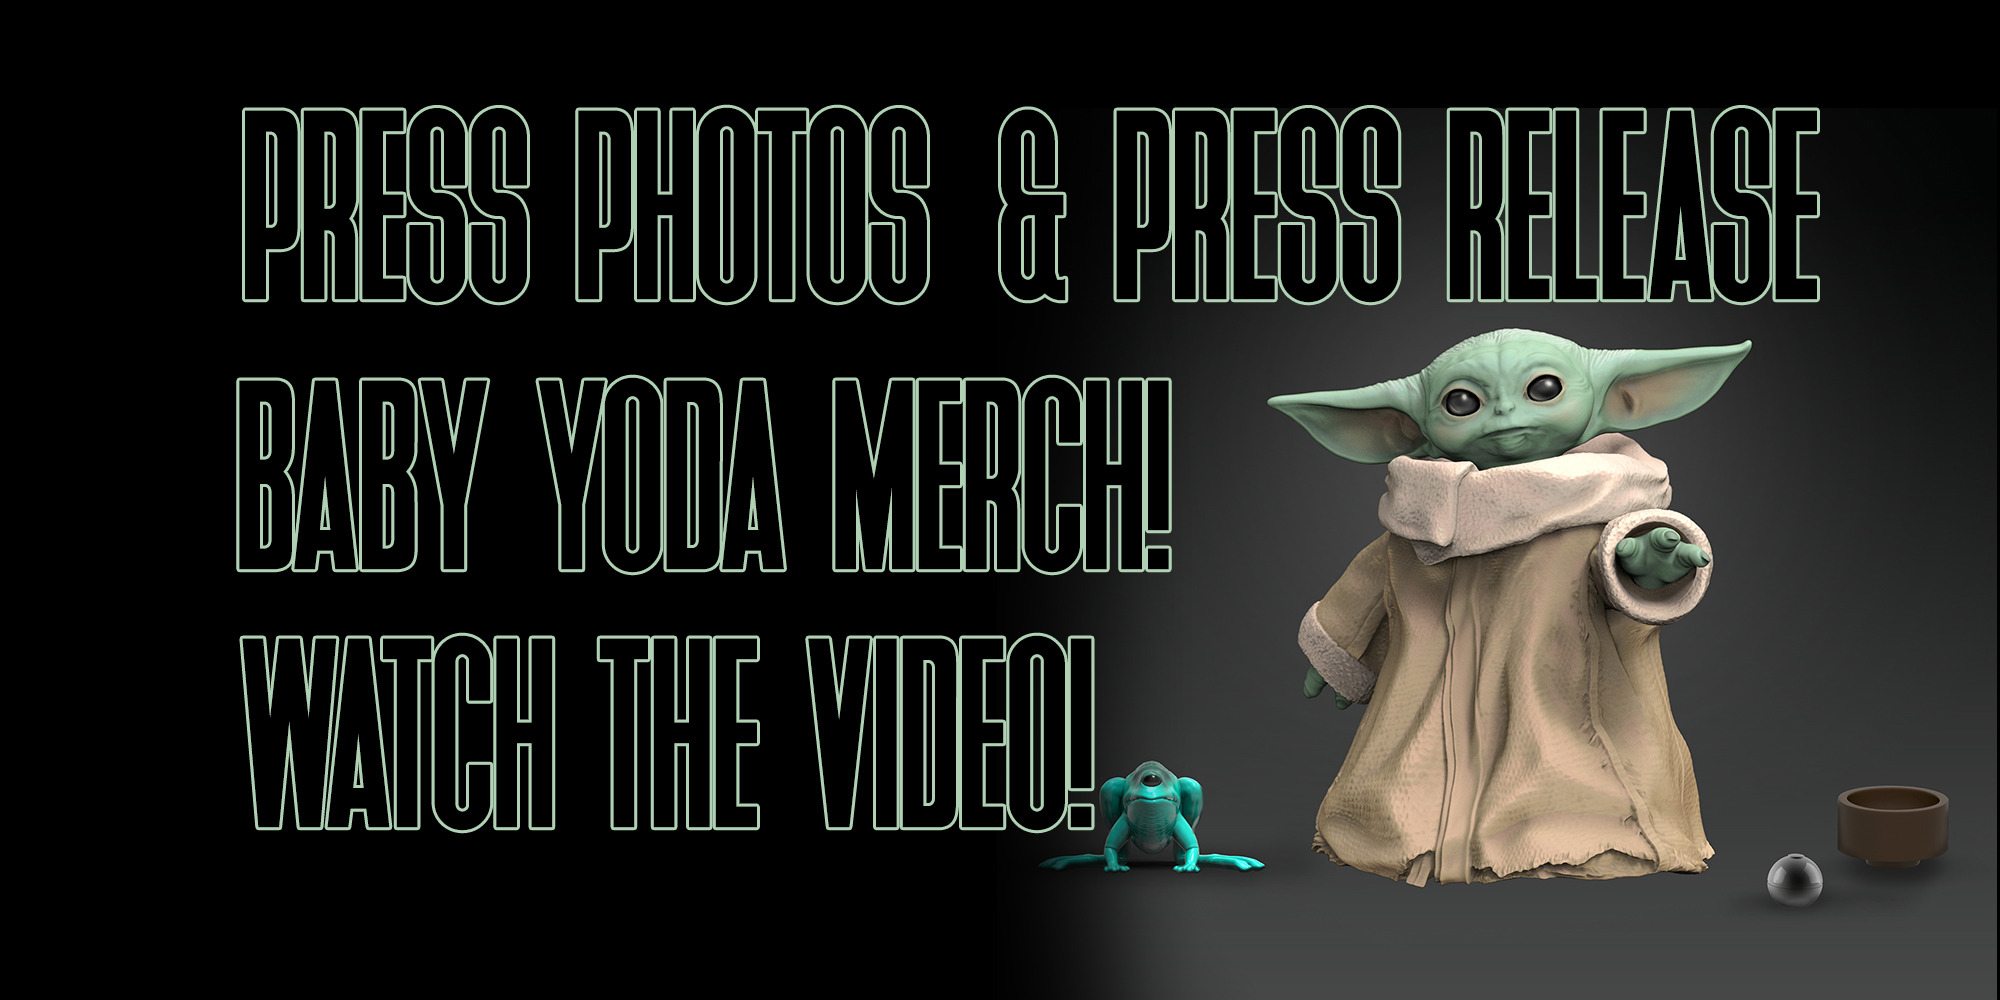 The Child "Baby Yoda" Press Photos And Video, Check It Out!